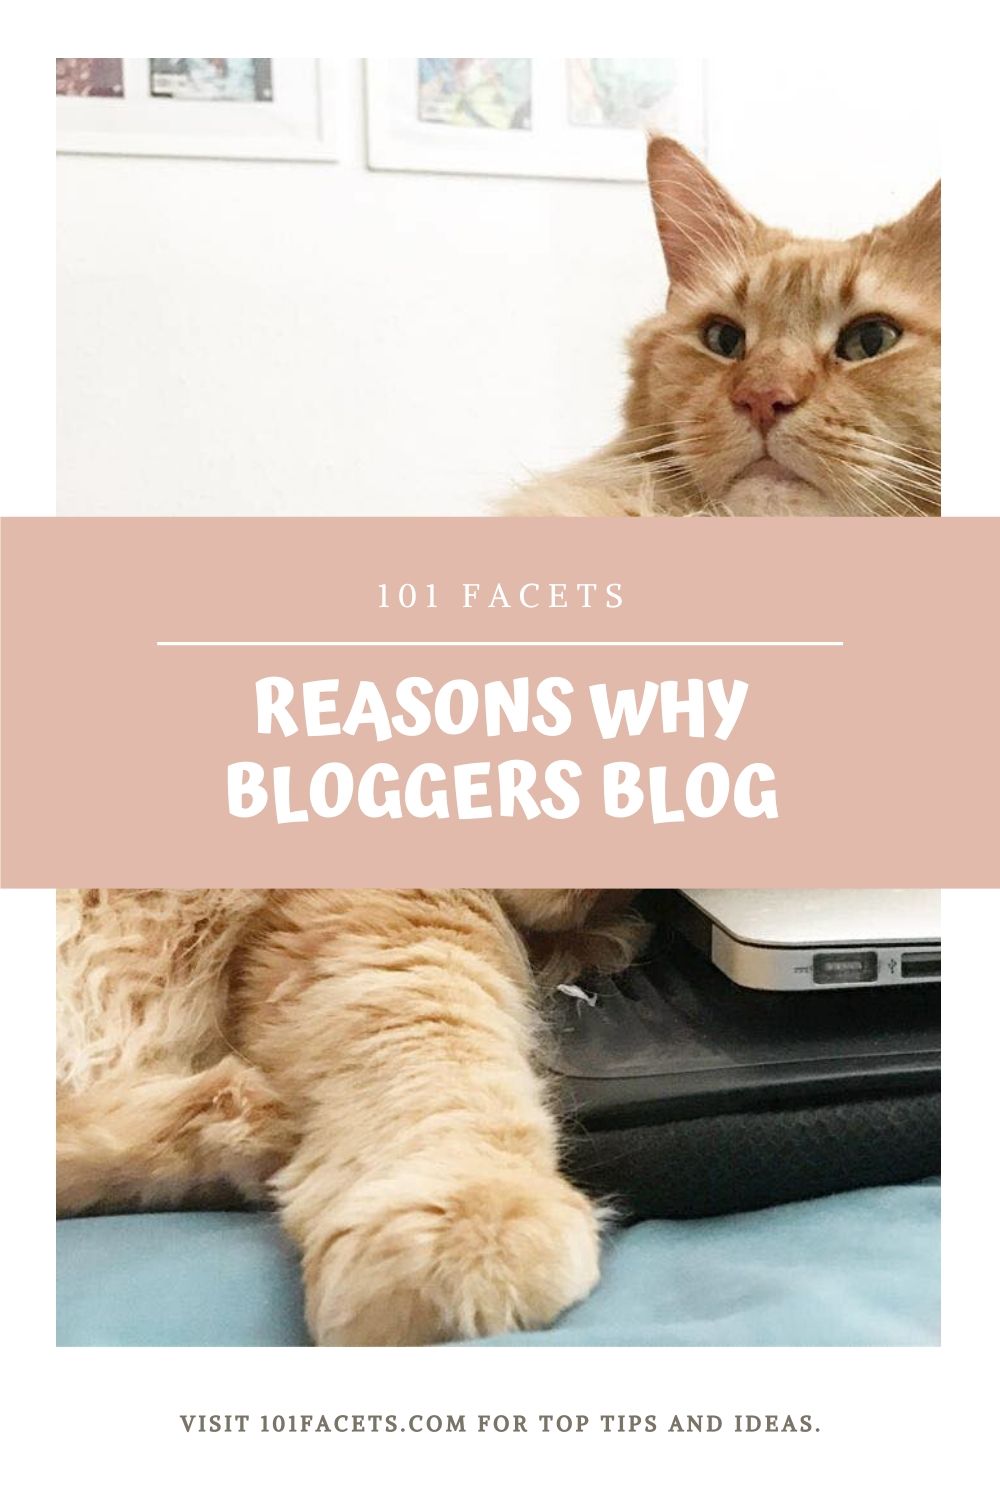 10 Reasons Why Bloggers Blog 2